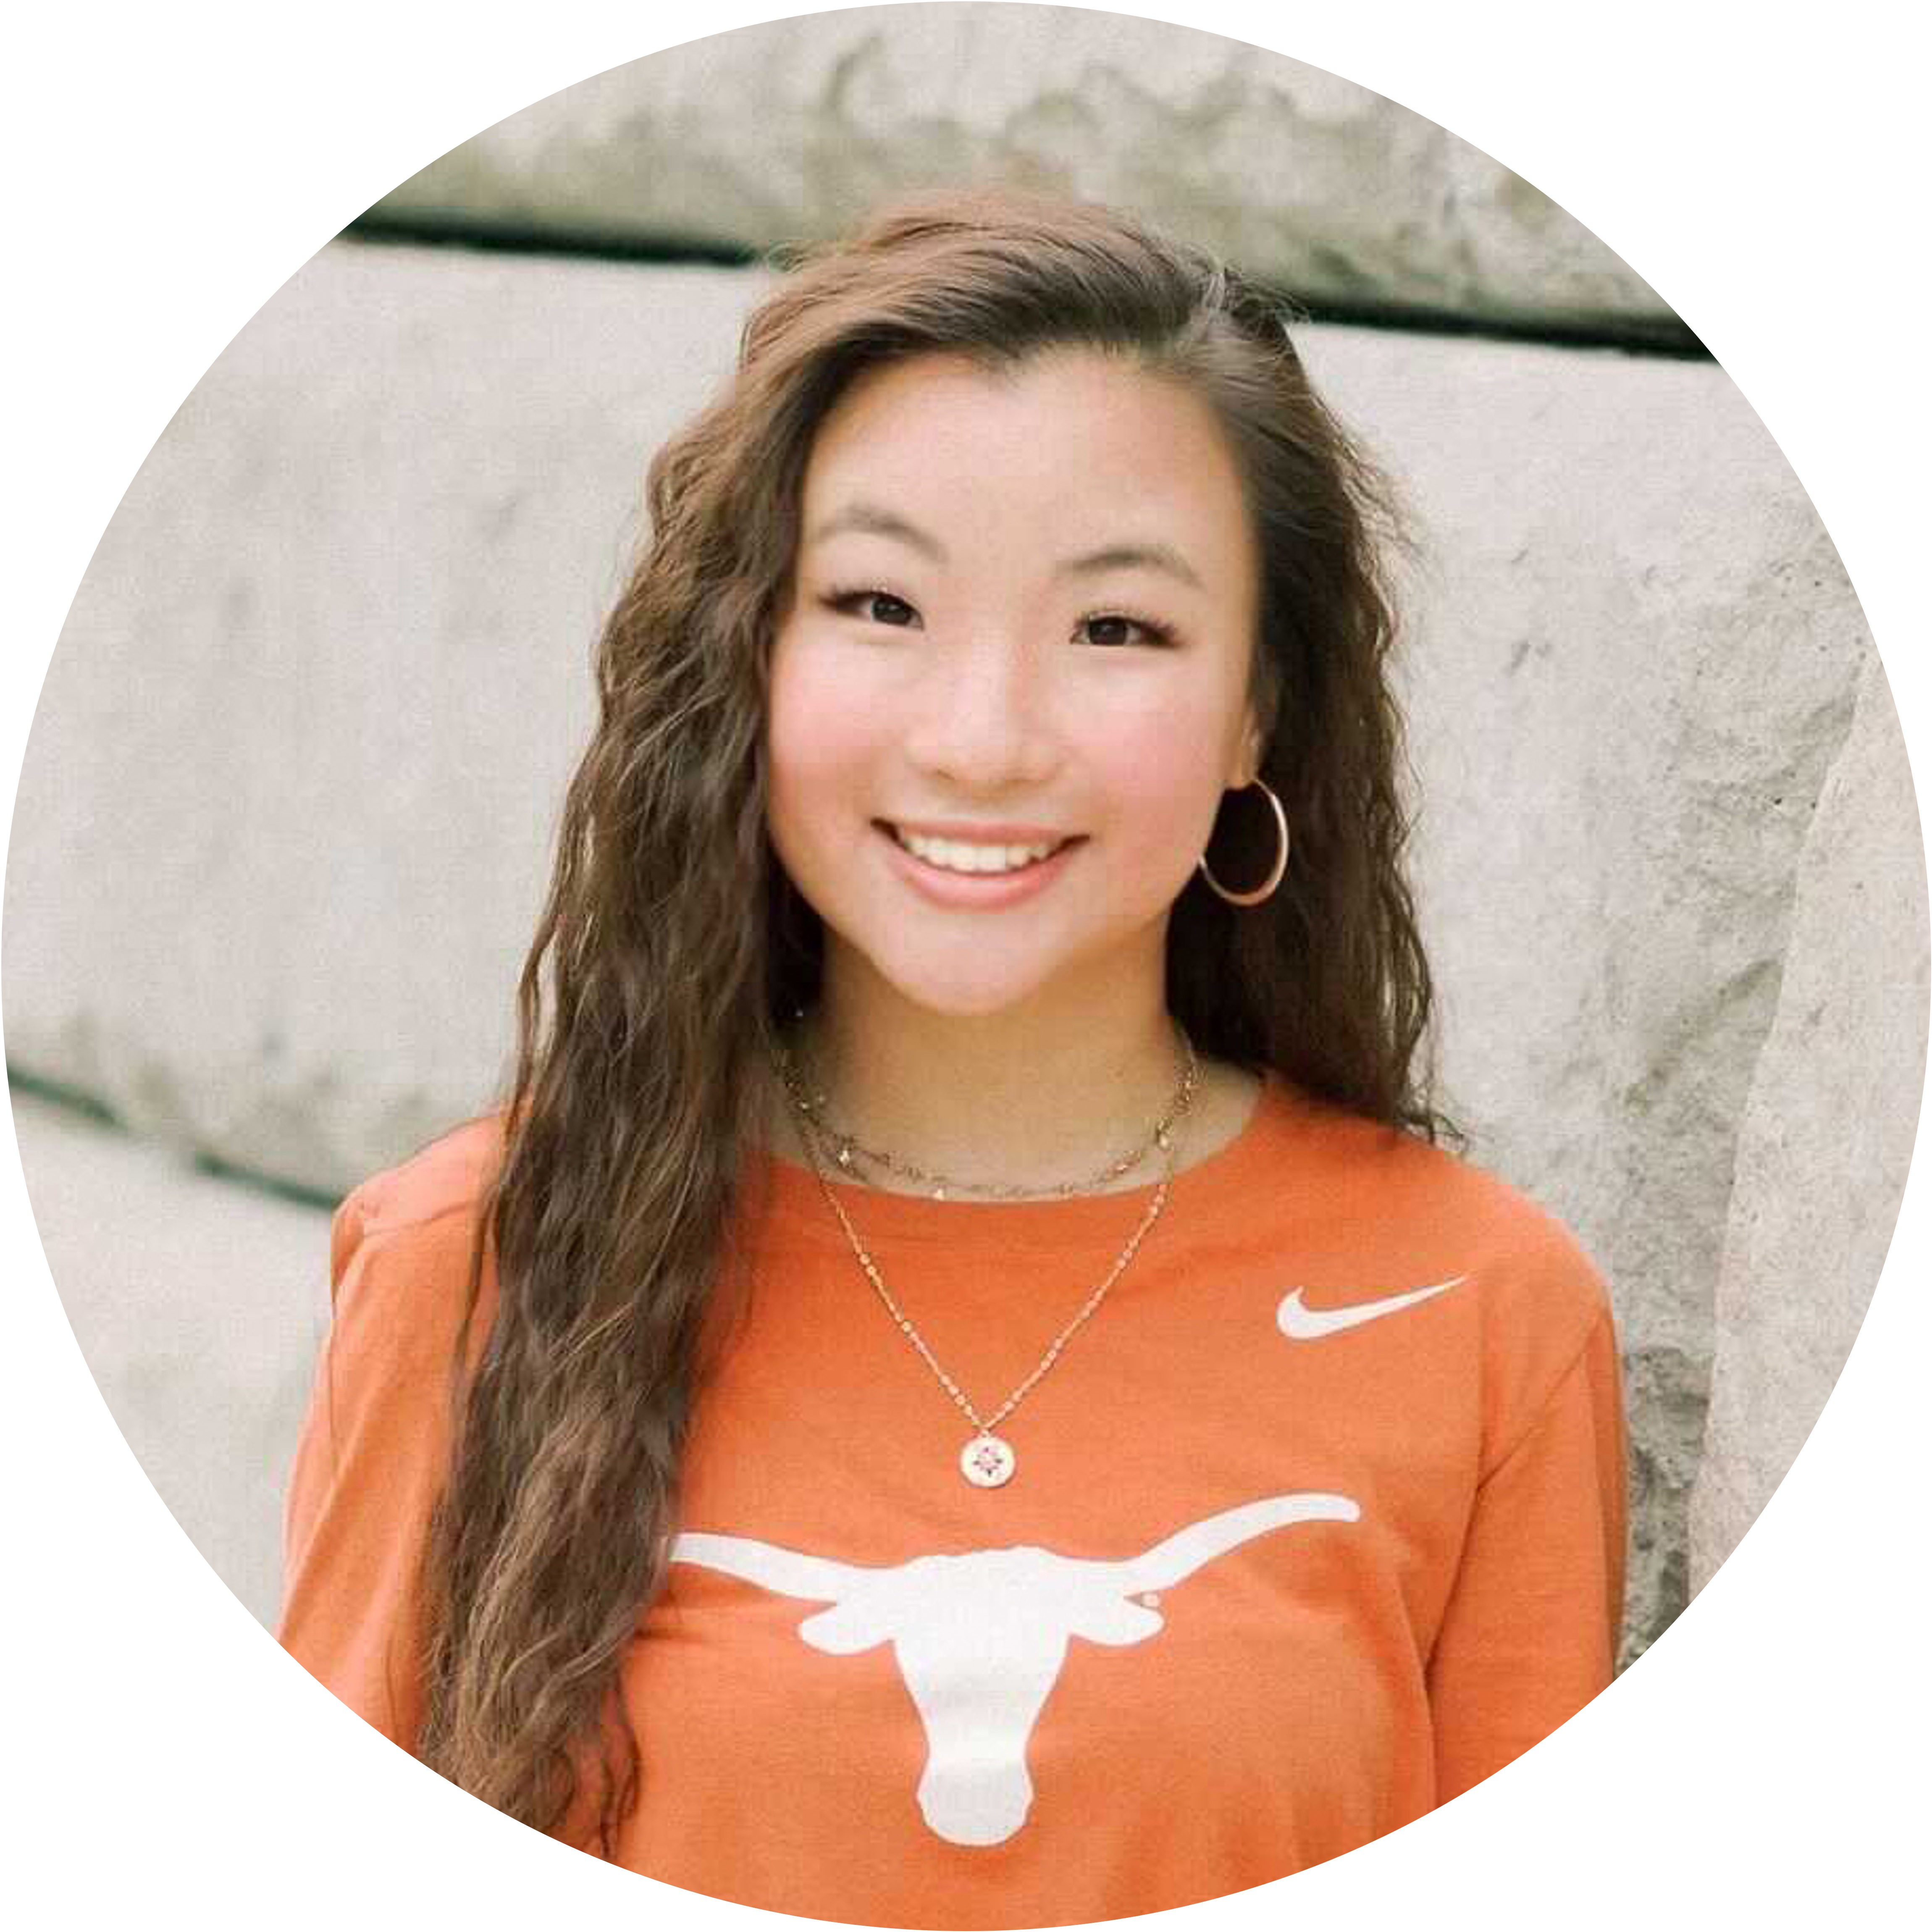 Melody Zhuo, smiling while wearing a UT Austin t-shirt